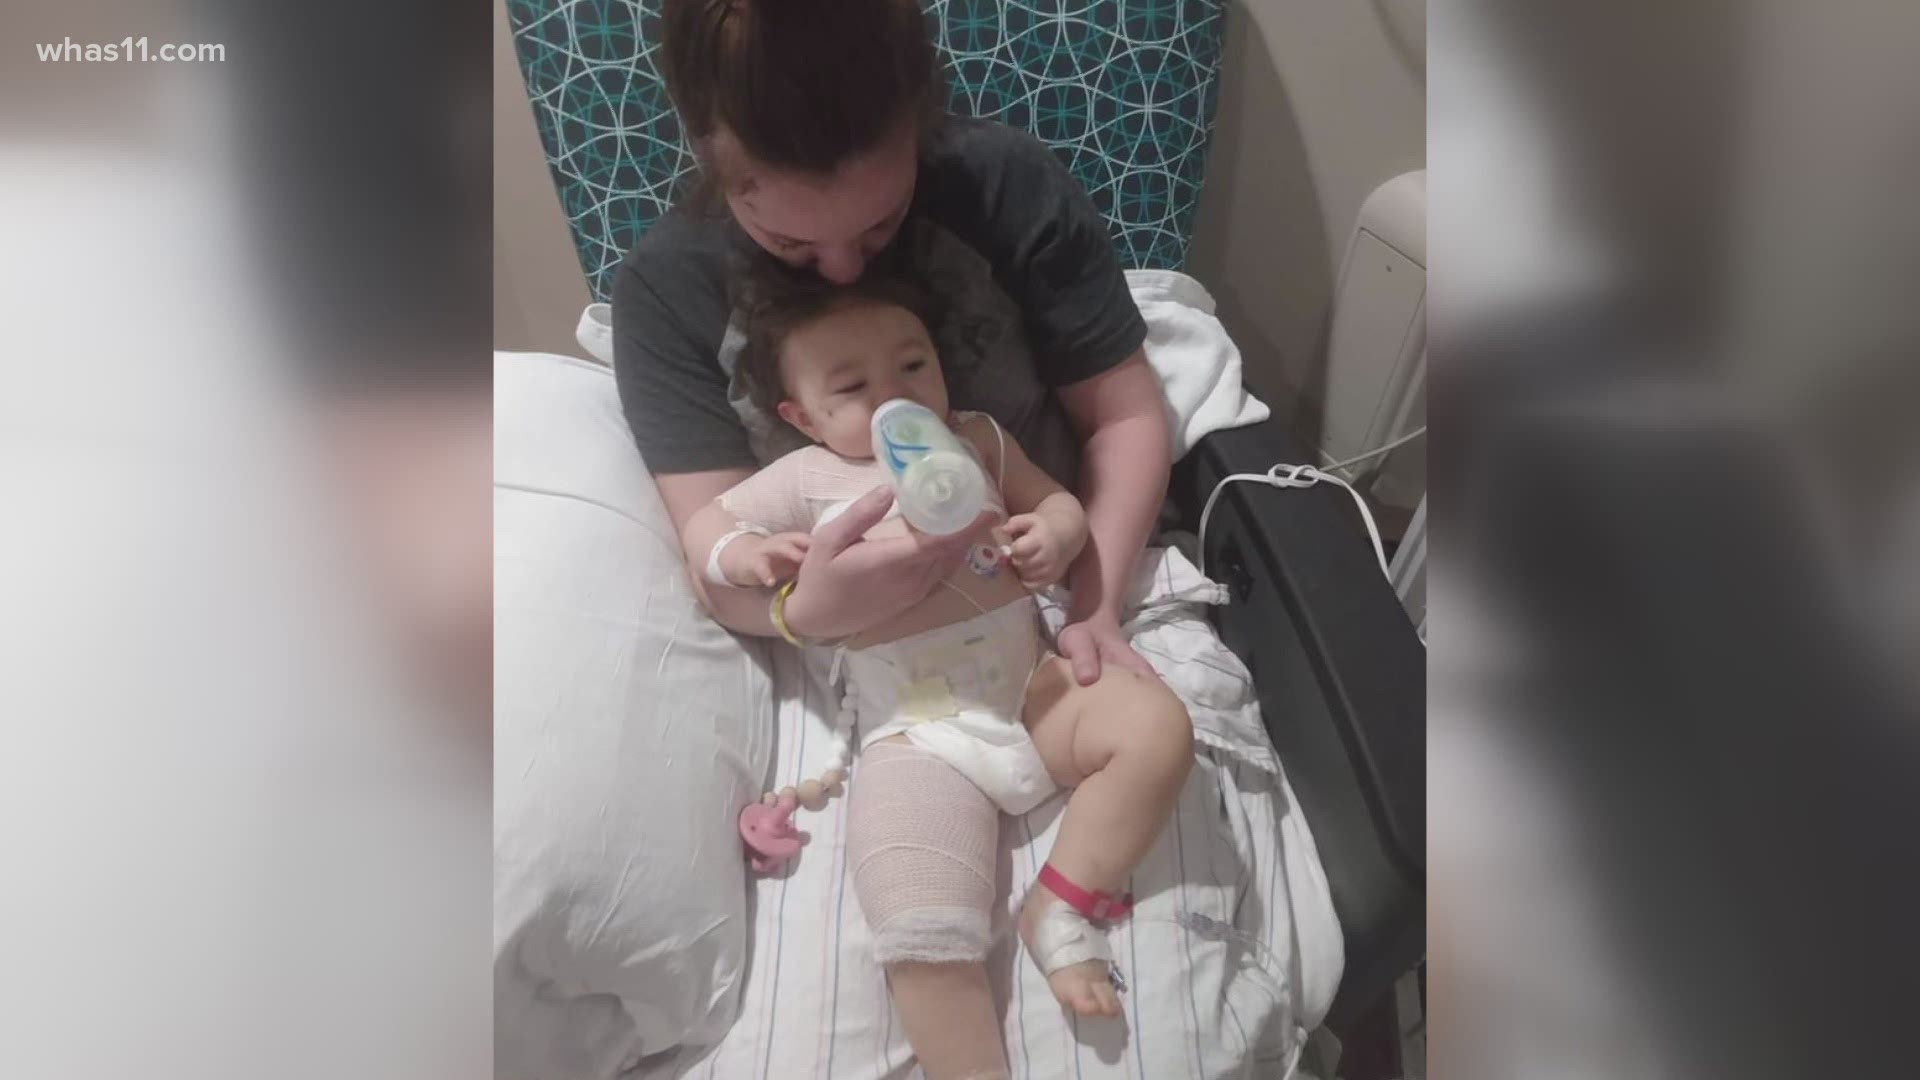 A 10-month-old girl is recovering in the hospital after being hit by a car in her own home.